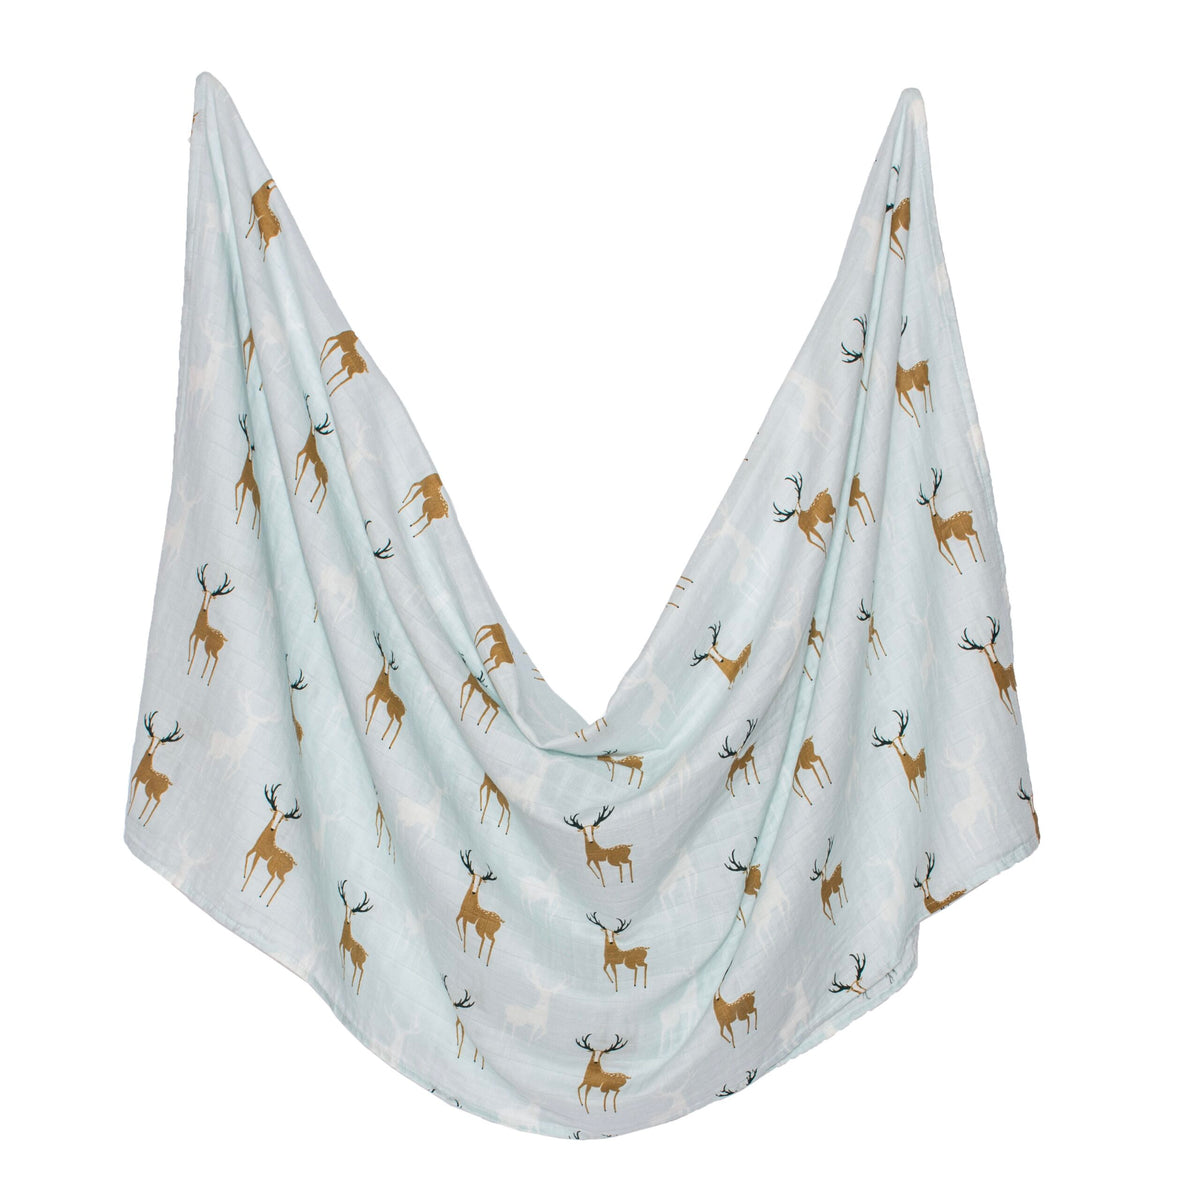 Tinker Tot Baby - Organic Cotton Swaddle – Striking Stag